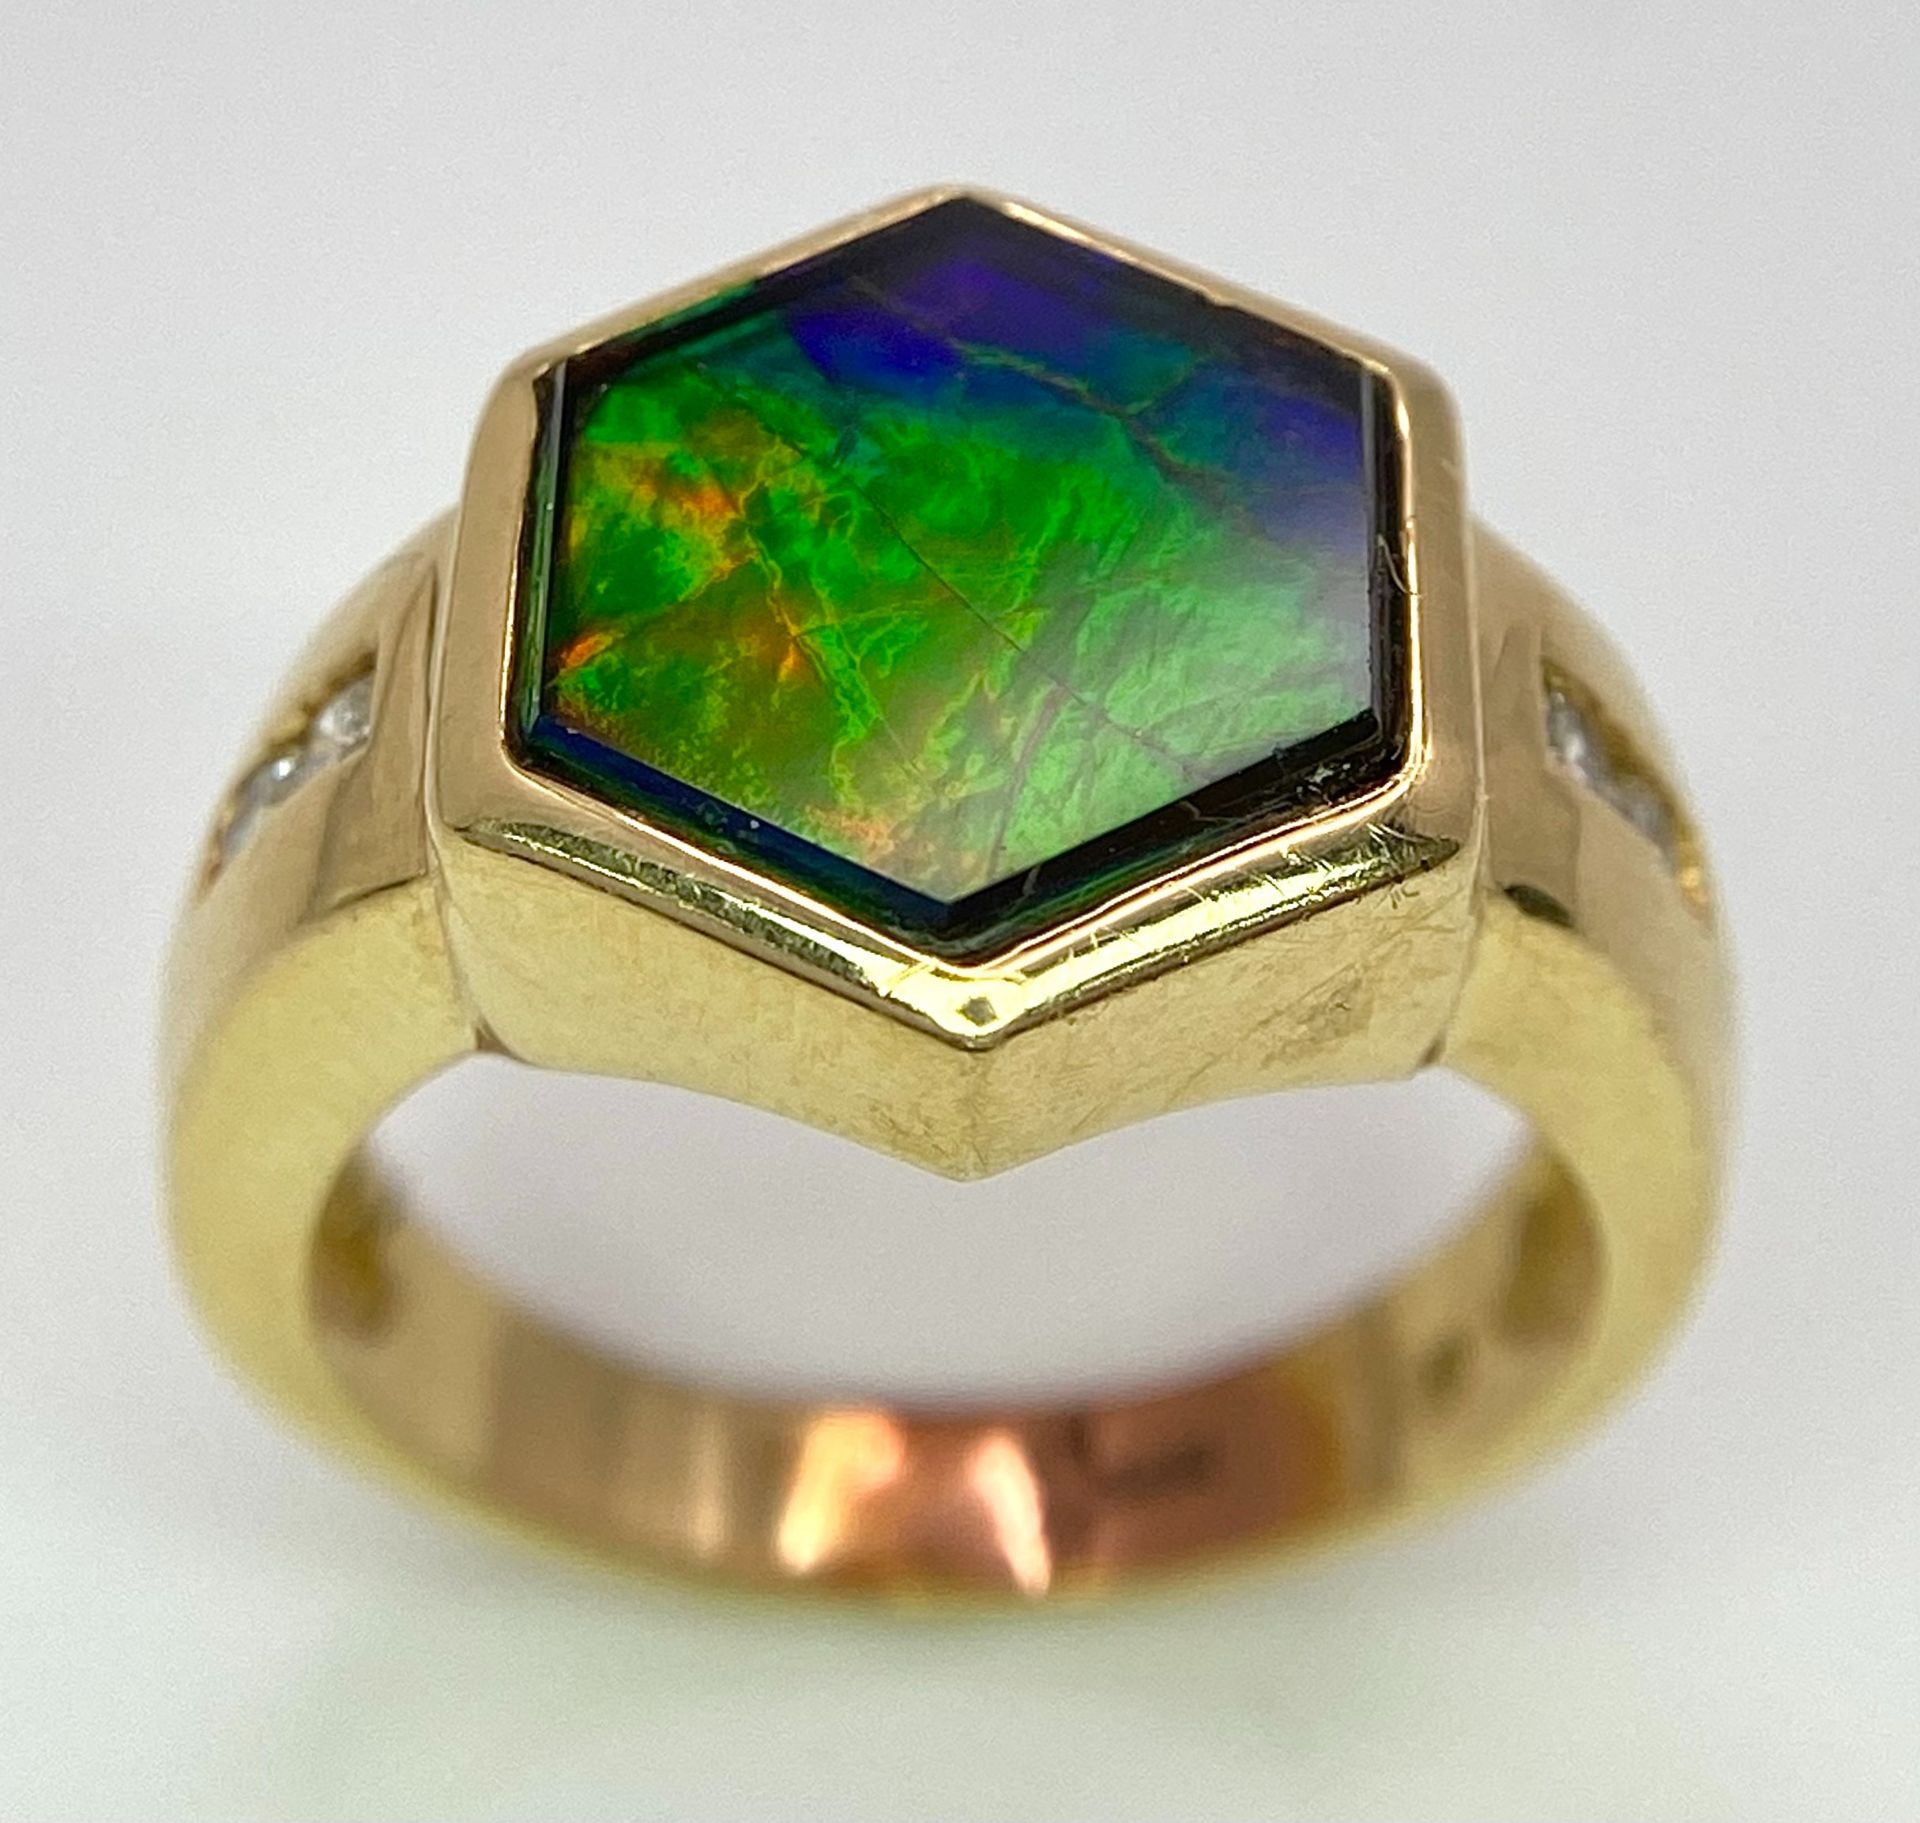 A Very Different, 14K Gold, Ammolite and Diamond Ring. Hexagonal shape. Size L. 6.3g total weight.